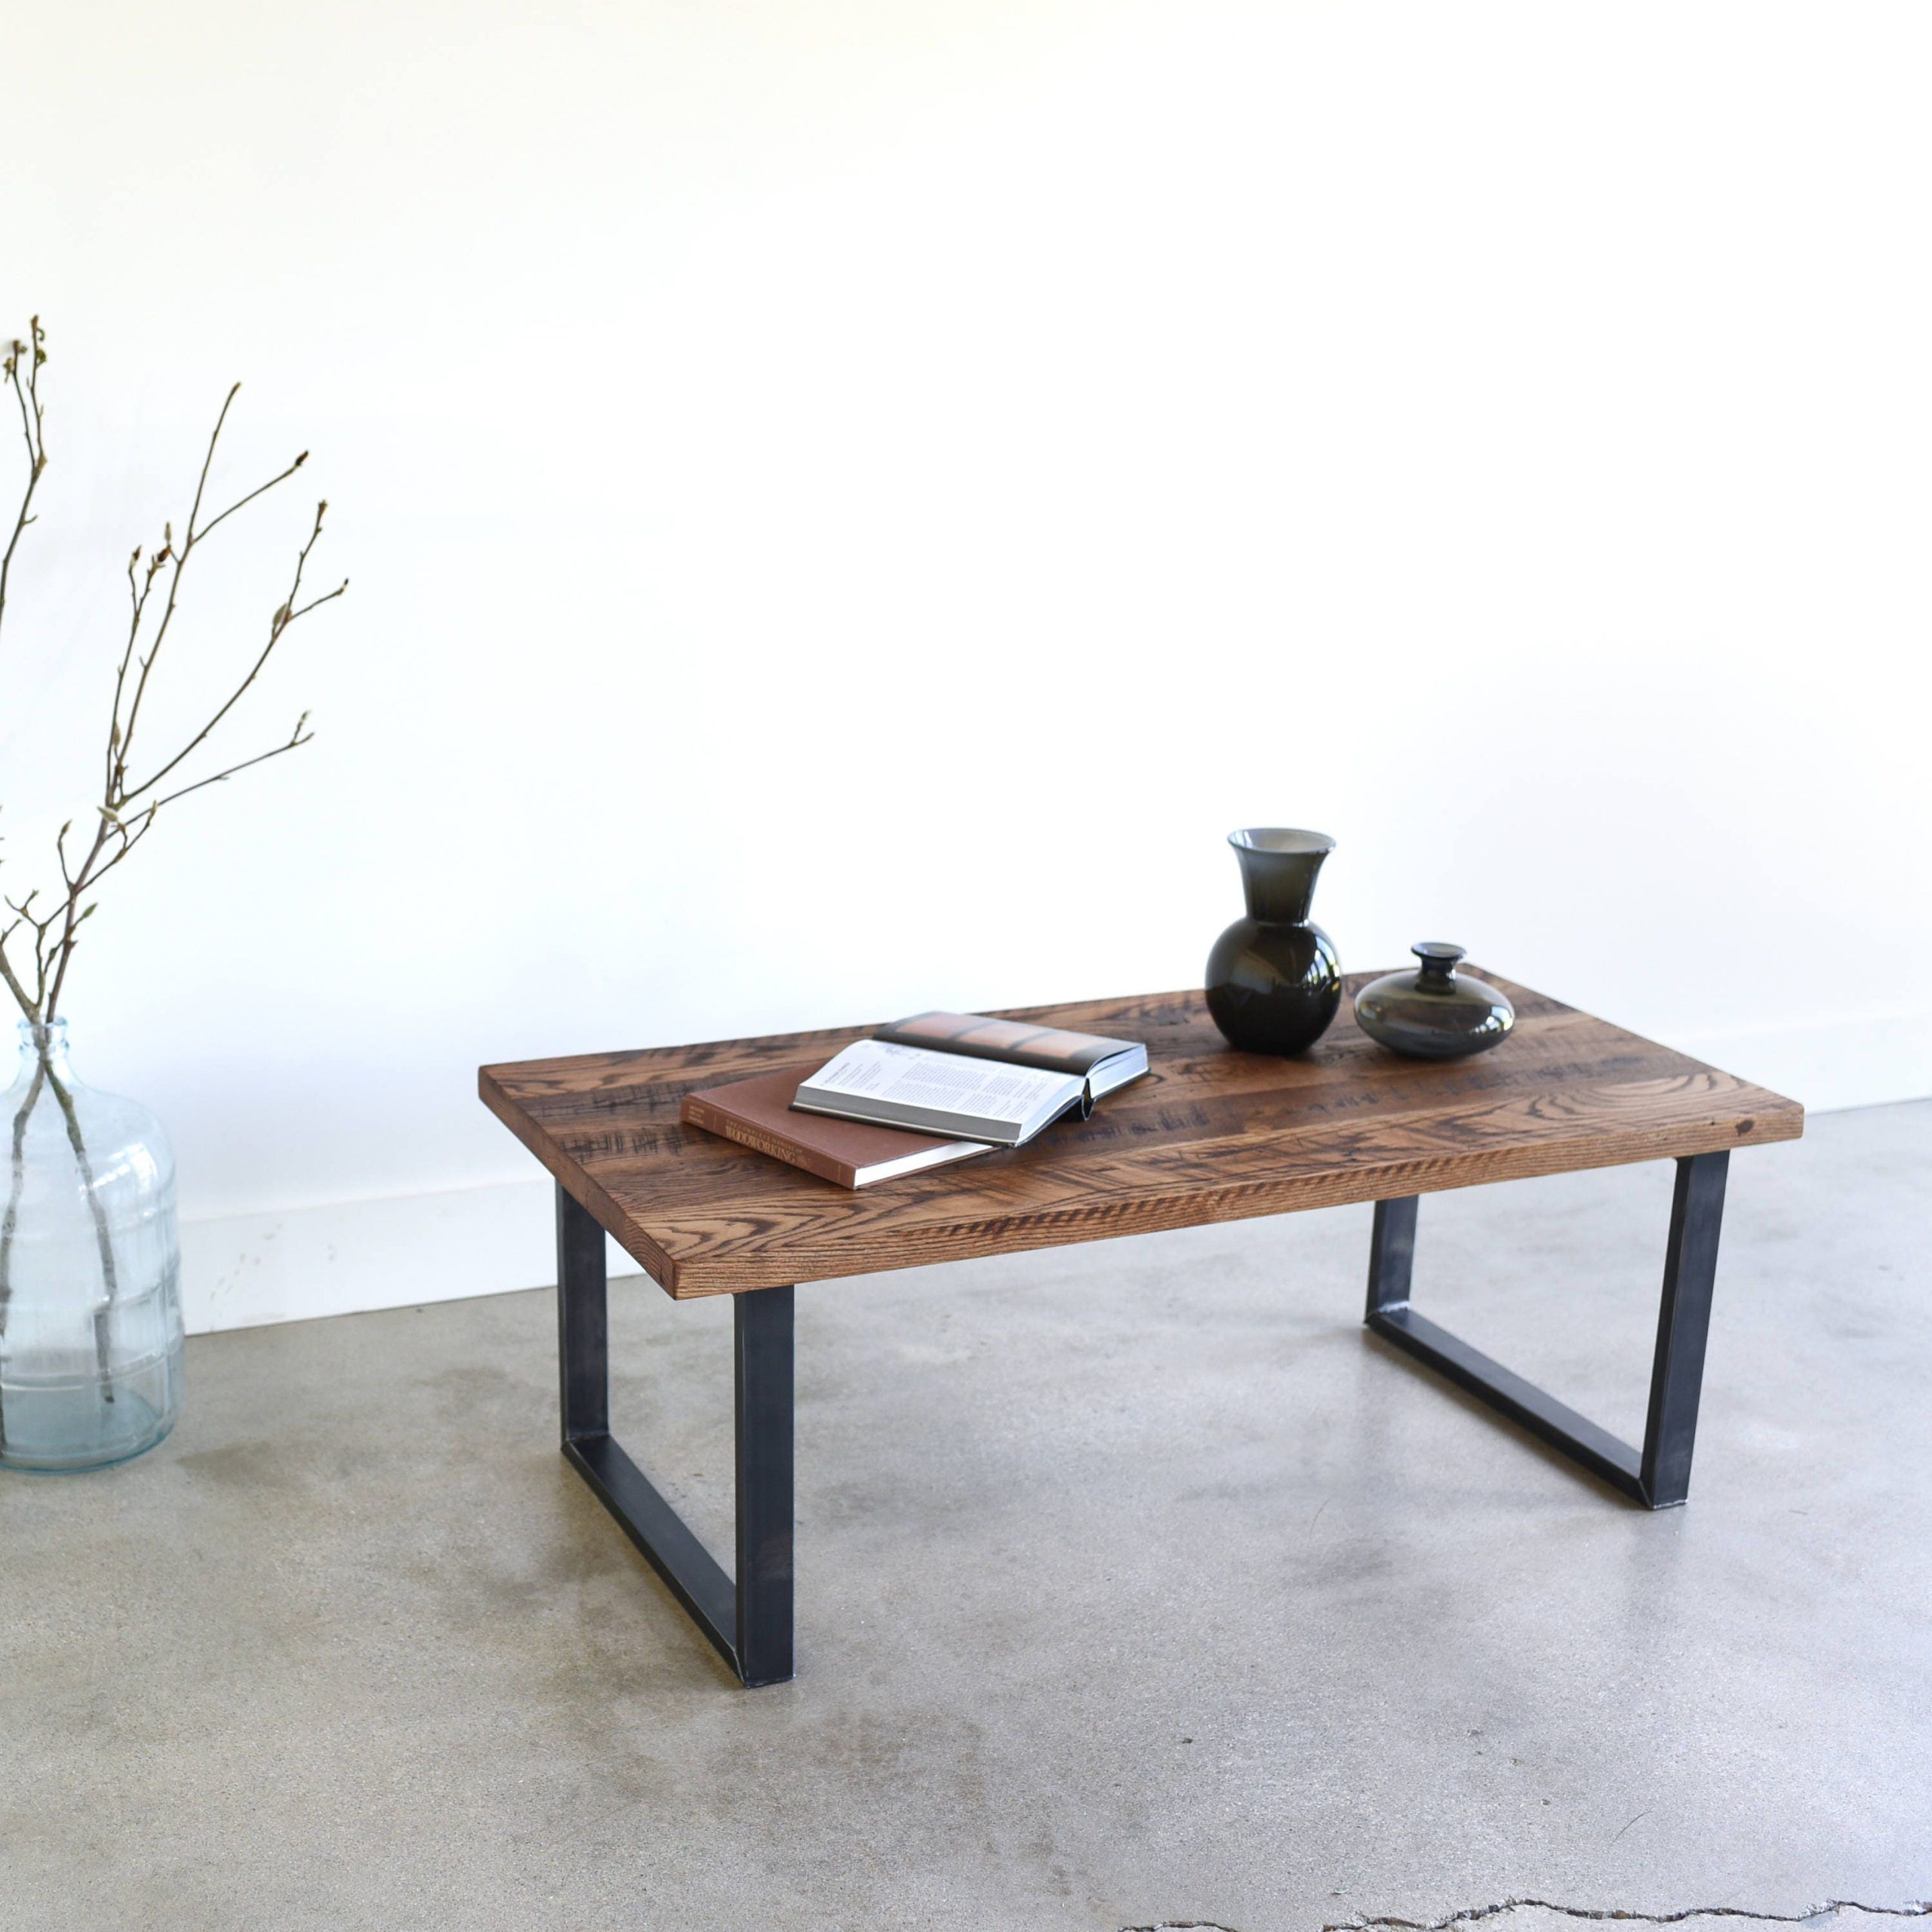 Reclaimed Wood Coffee Table / Industrial U Shaped Metal Legs – Etsy For Coffee Tables With Metal Legs (View 4 of 15)